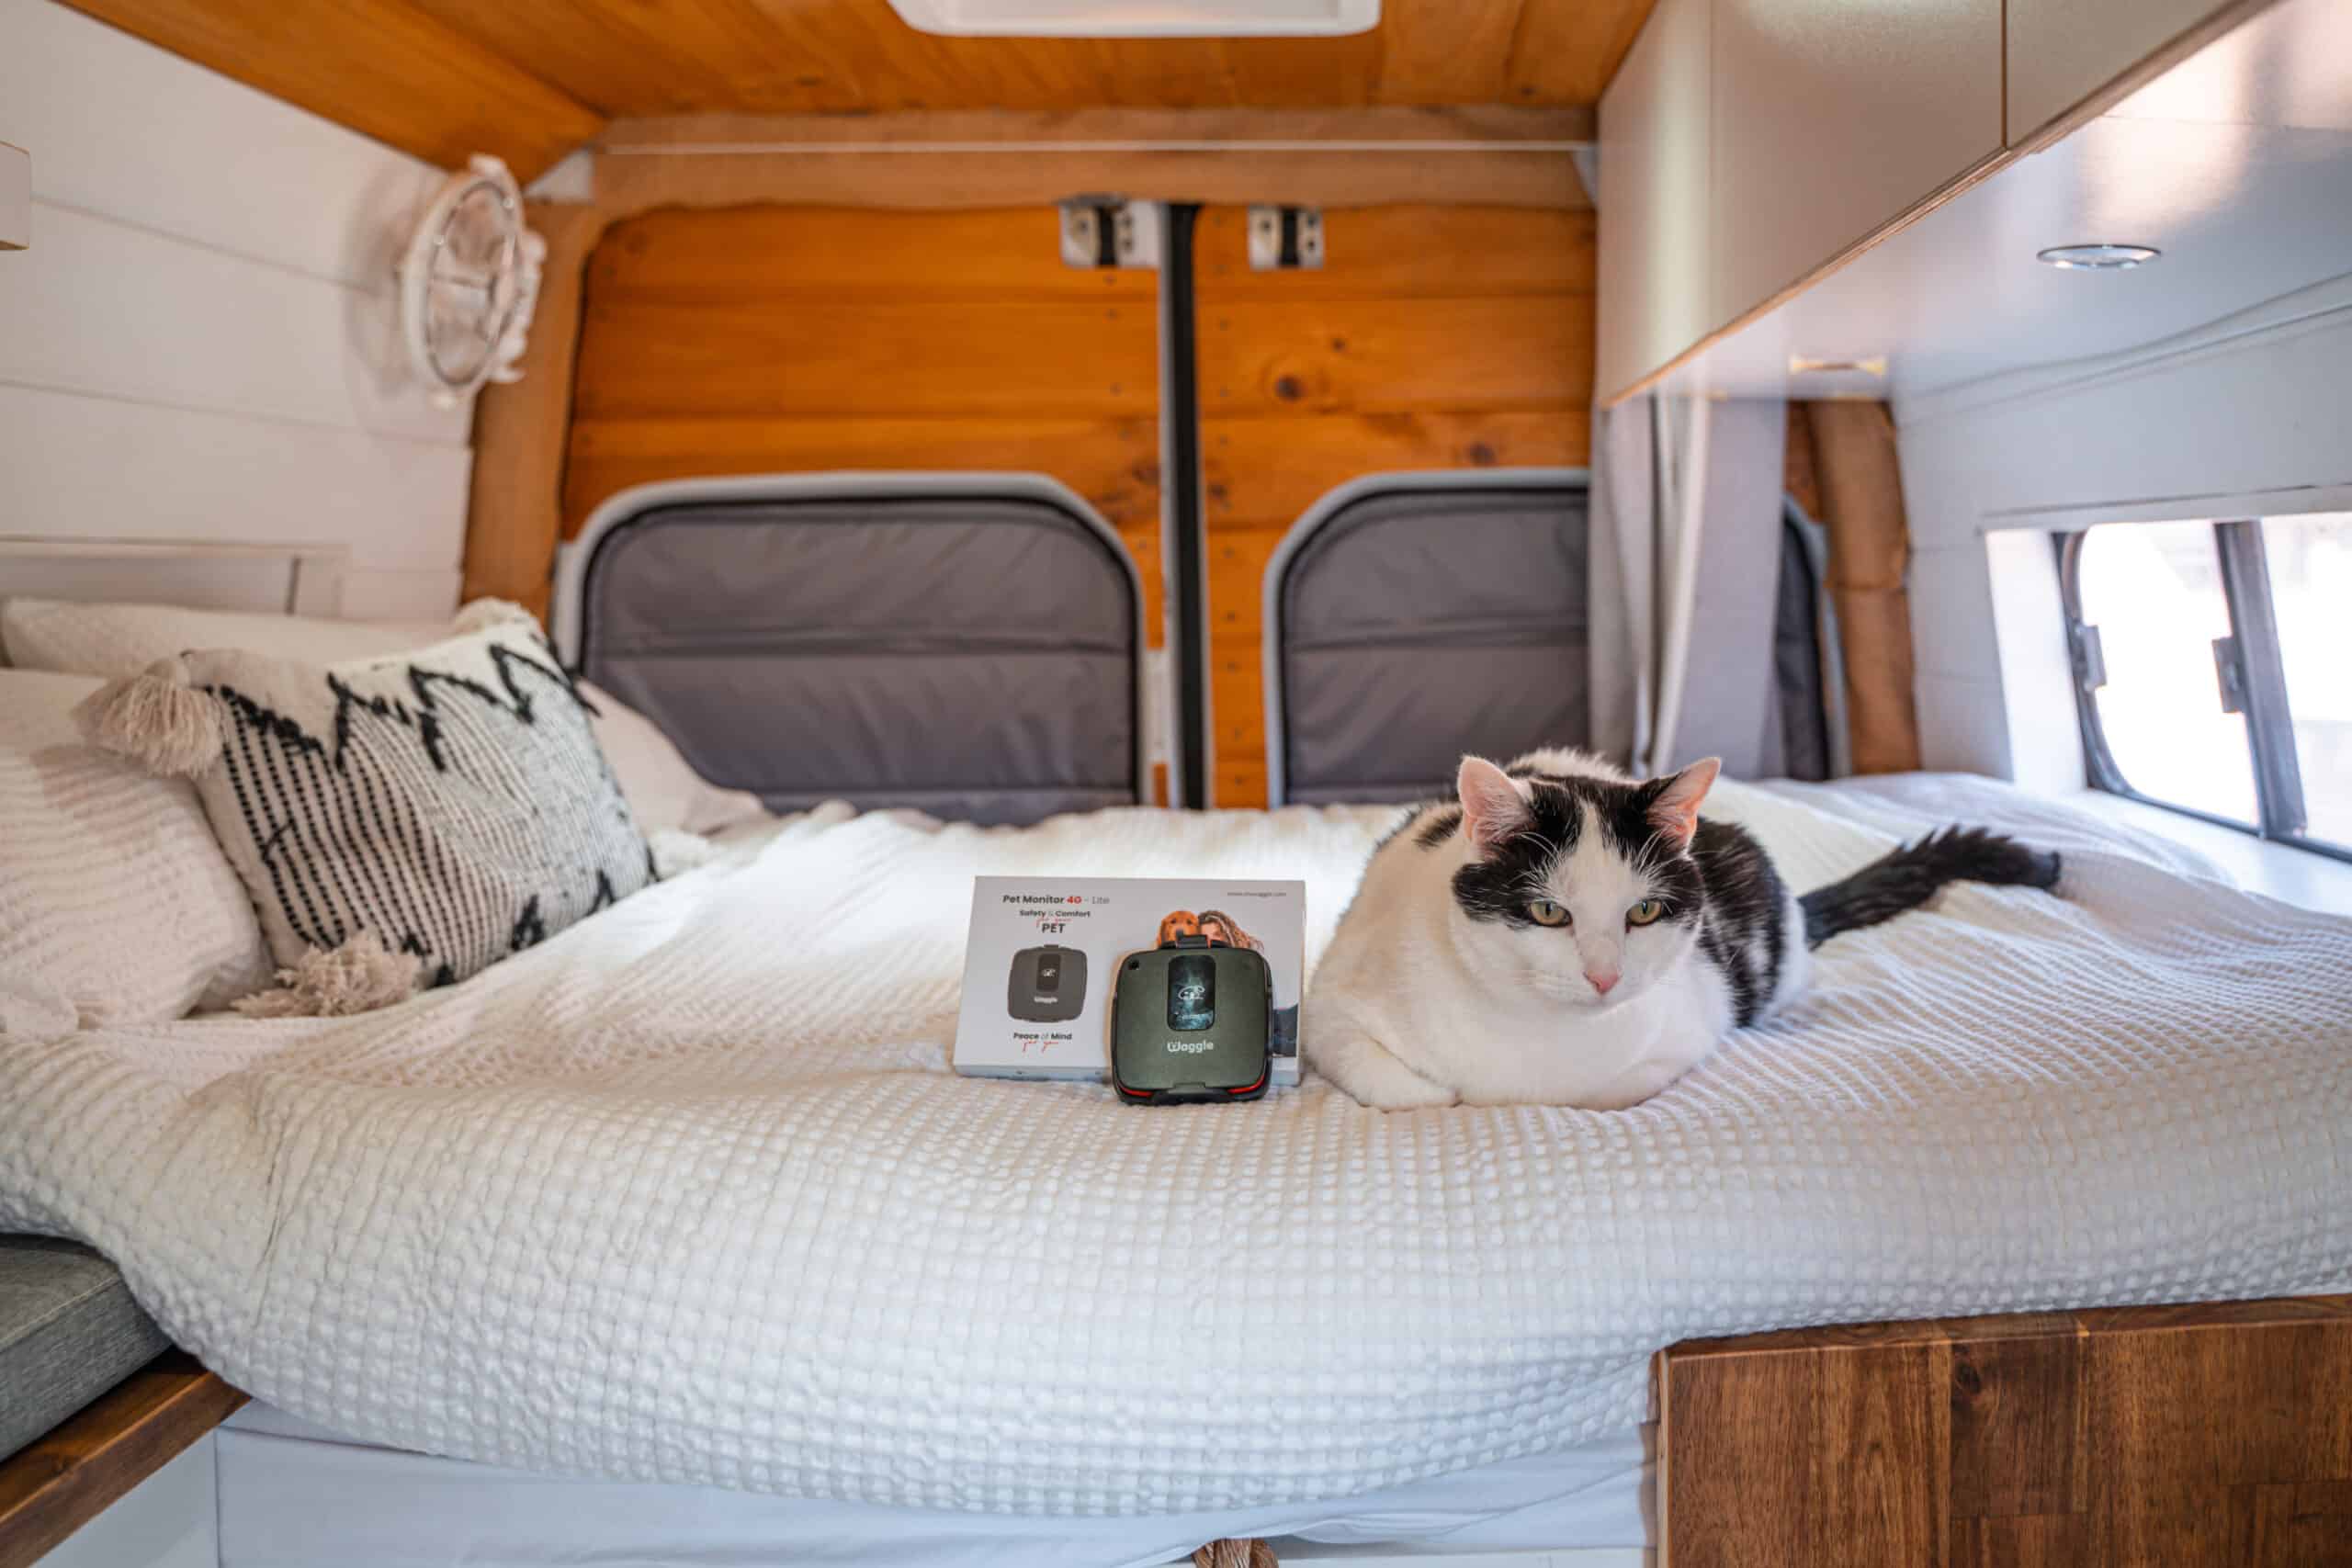 Waggle Pet monitor in a campervan bed with a cat